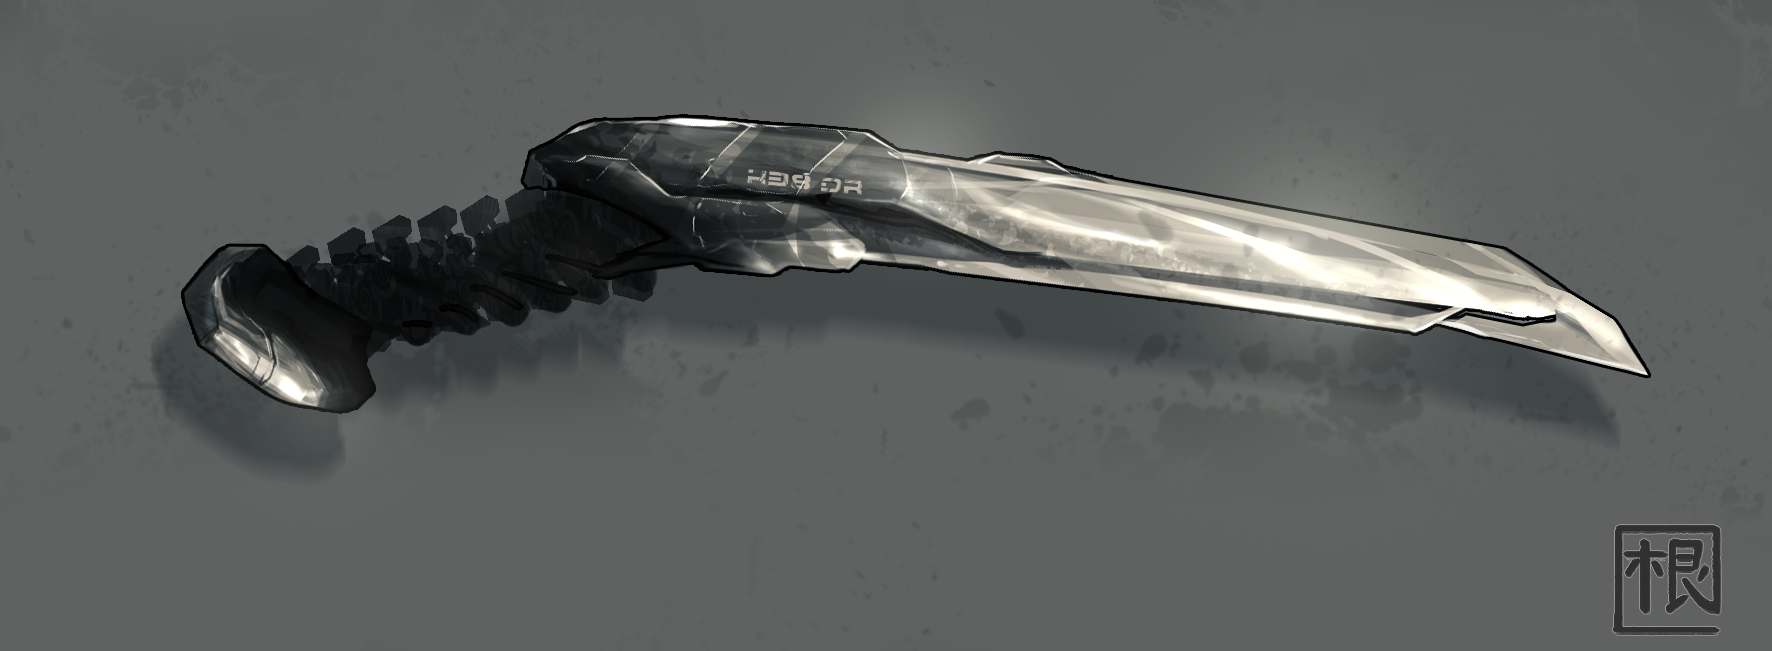 knife_m_by_davespineapple-d8cf9pj.png